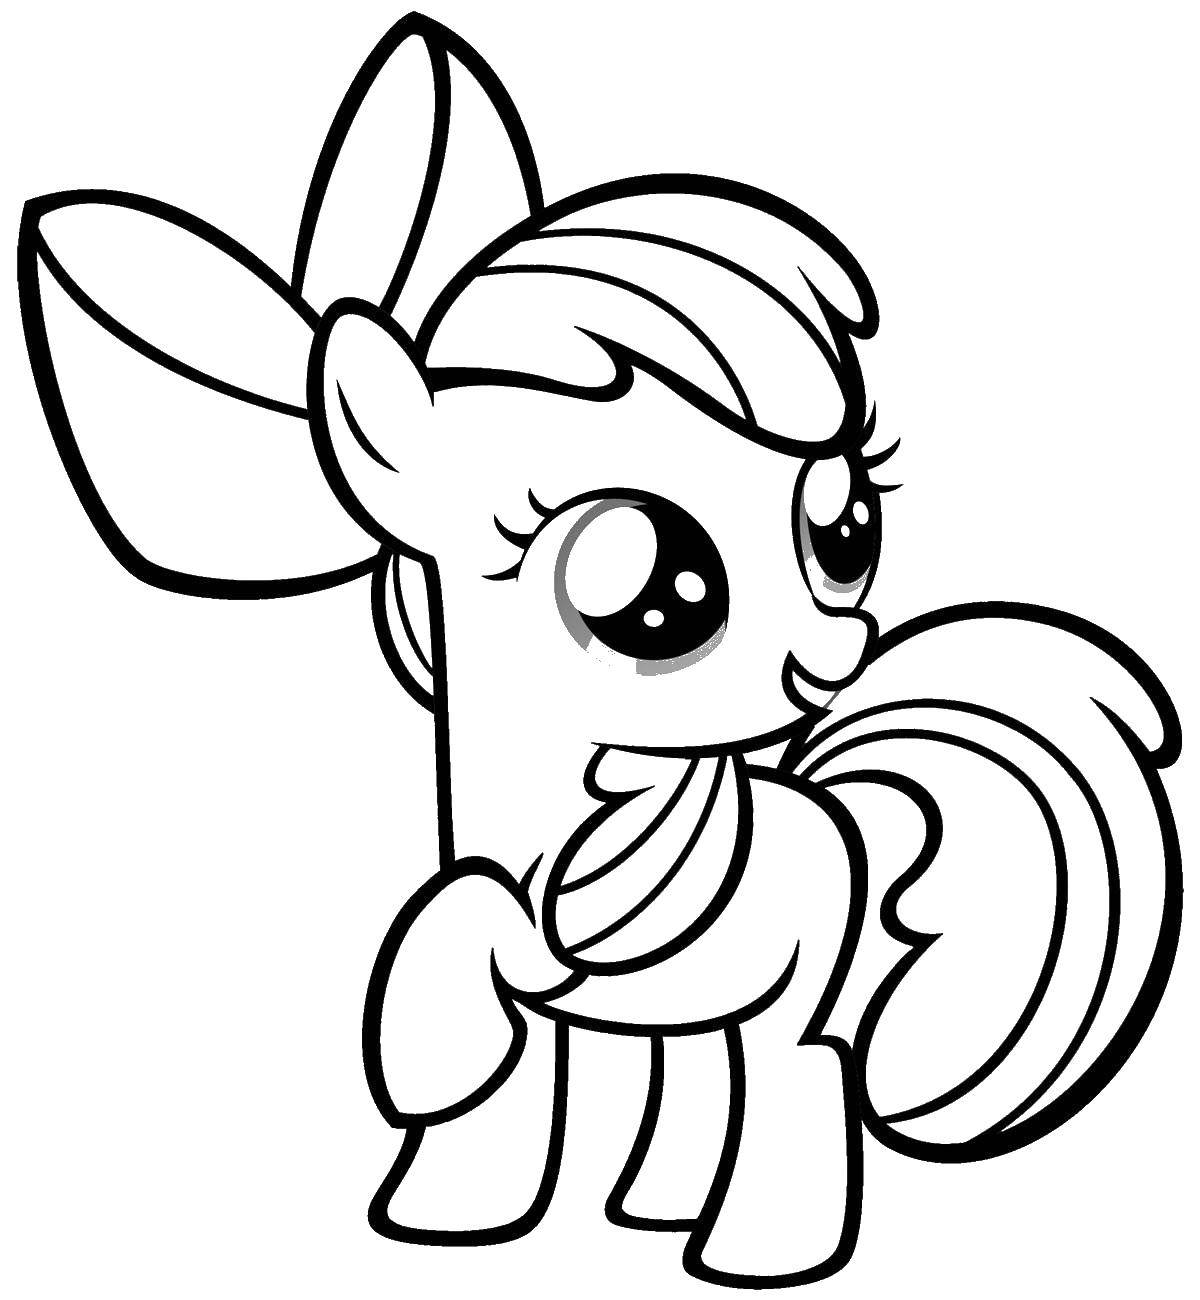 Coloring My little pony. Category Ponies. Tags:  my little pony, pony, horse.